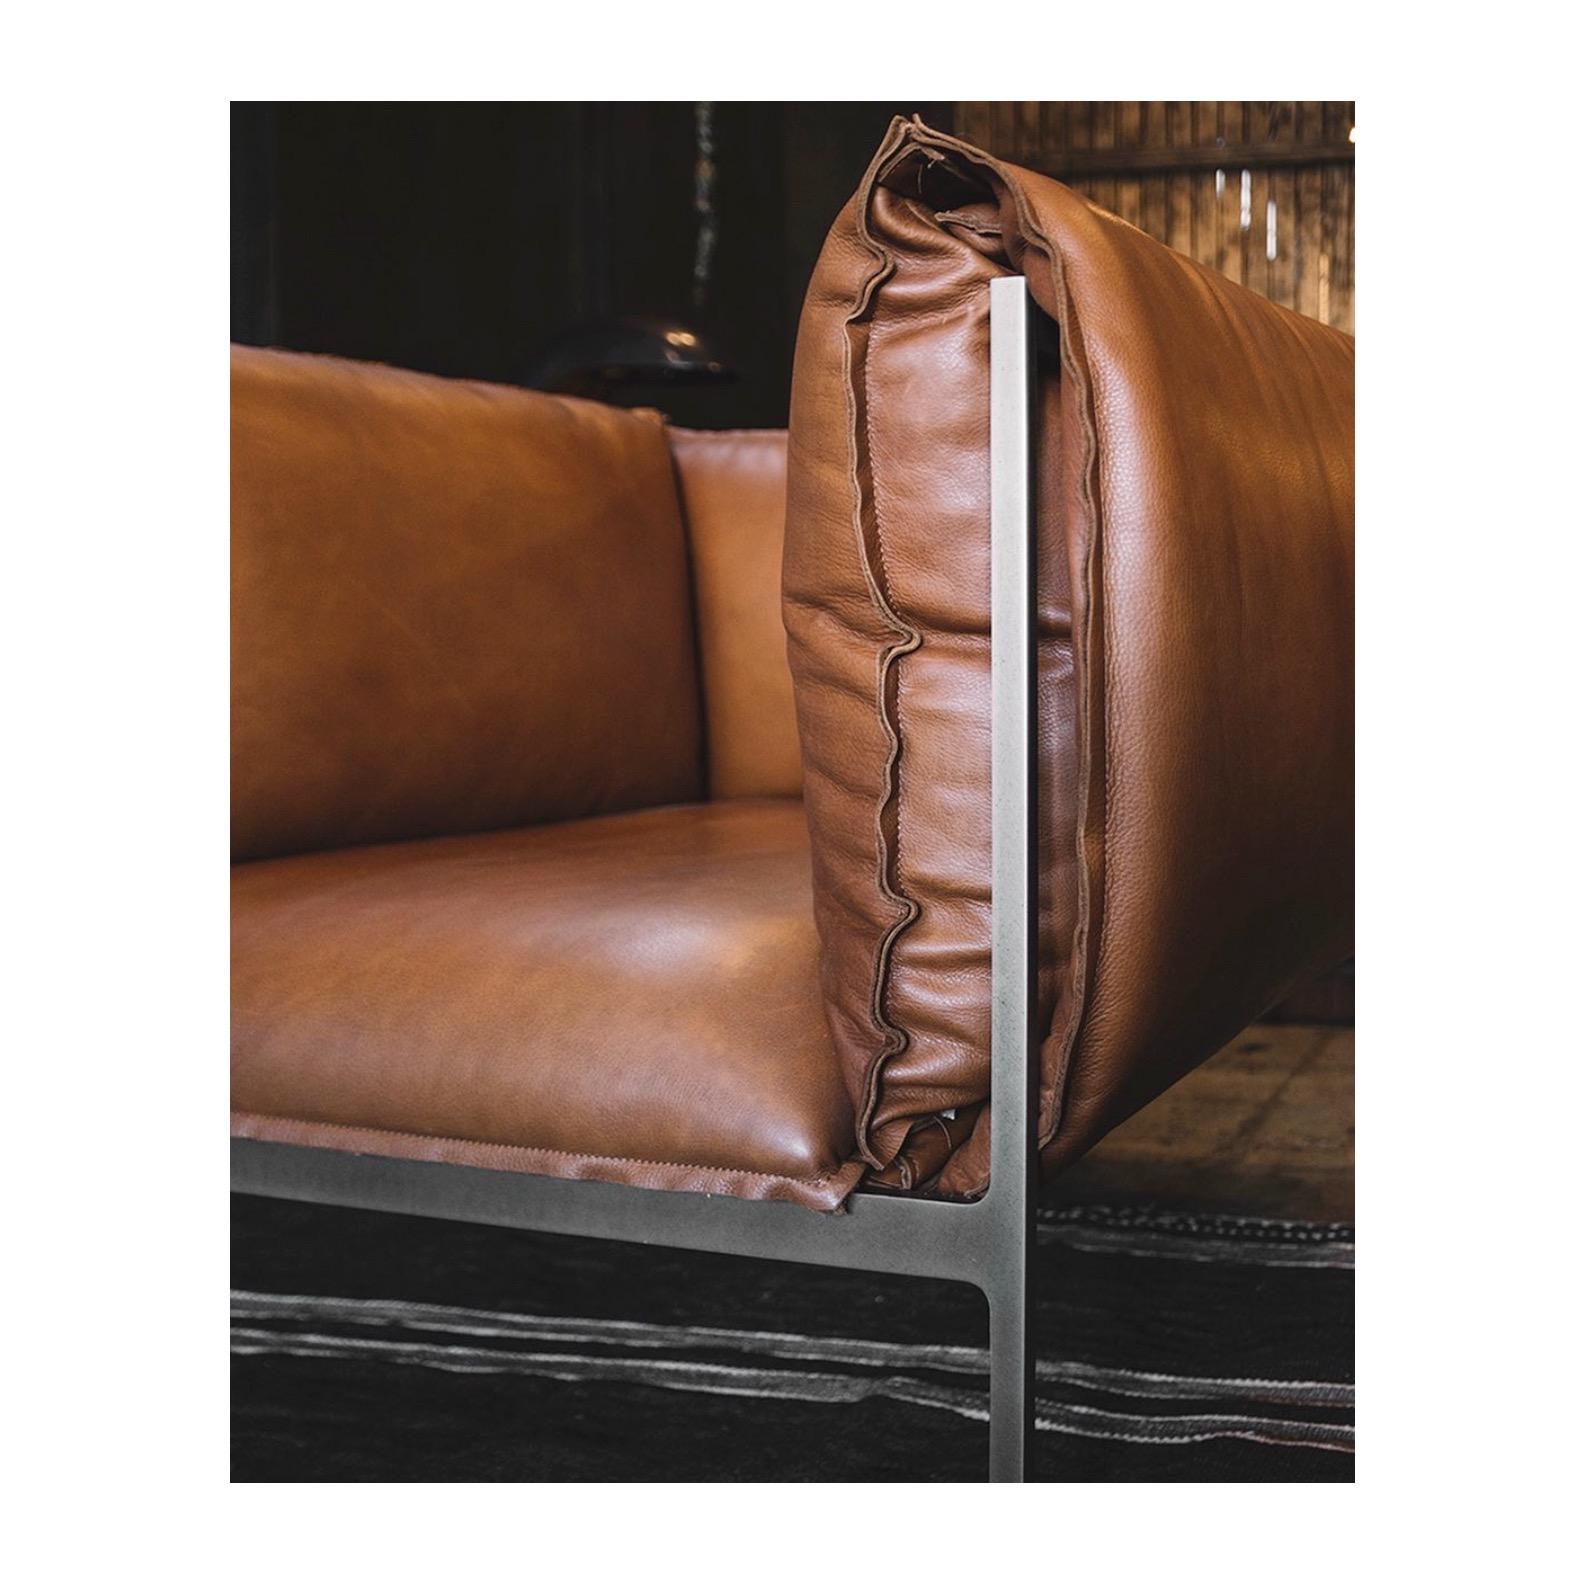 Bulging over its edges, this contemporary single sofa seat by Klein Agency screams comfort. Puffy cushions hug the laser cut steel frame, creating a supple cocoon, demanding you to wallow in its softness. With its bulky front and bulging back, the